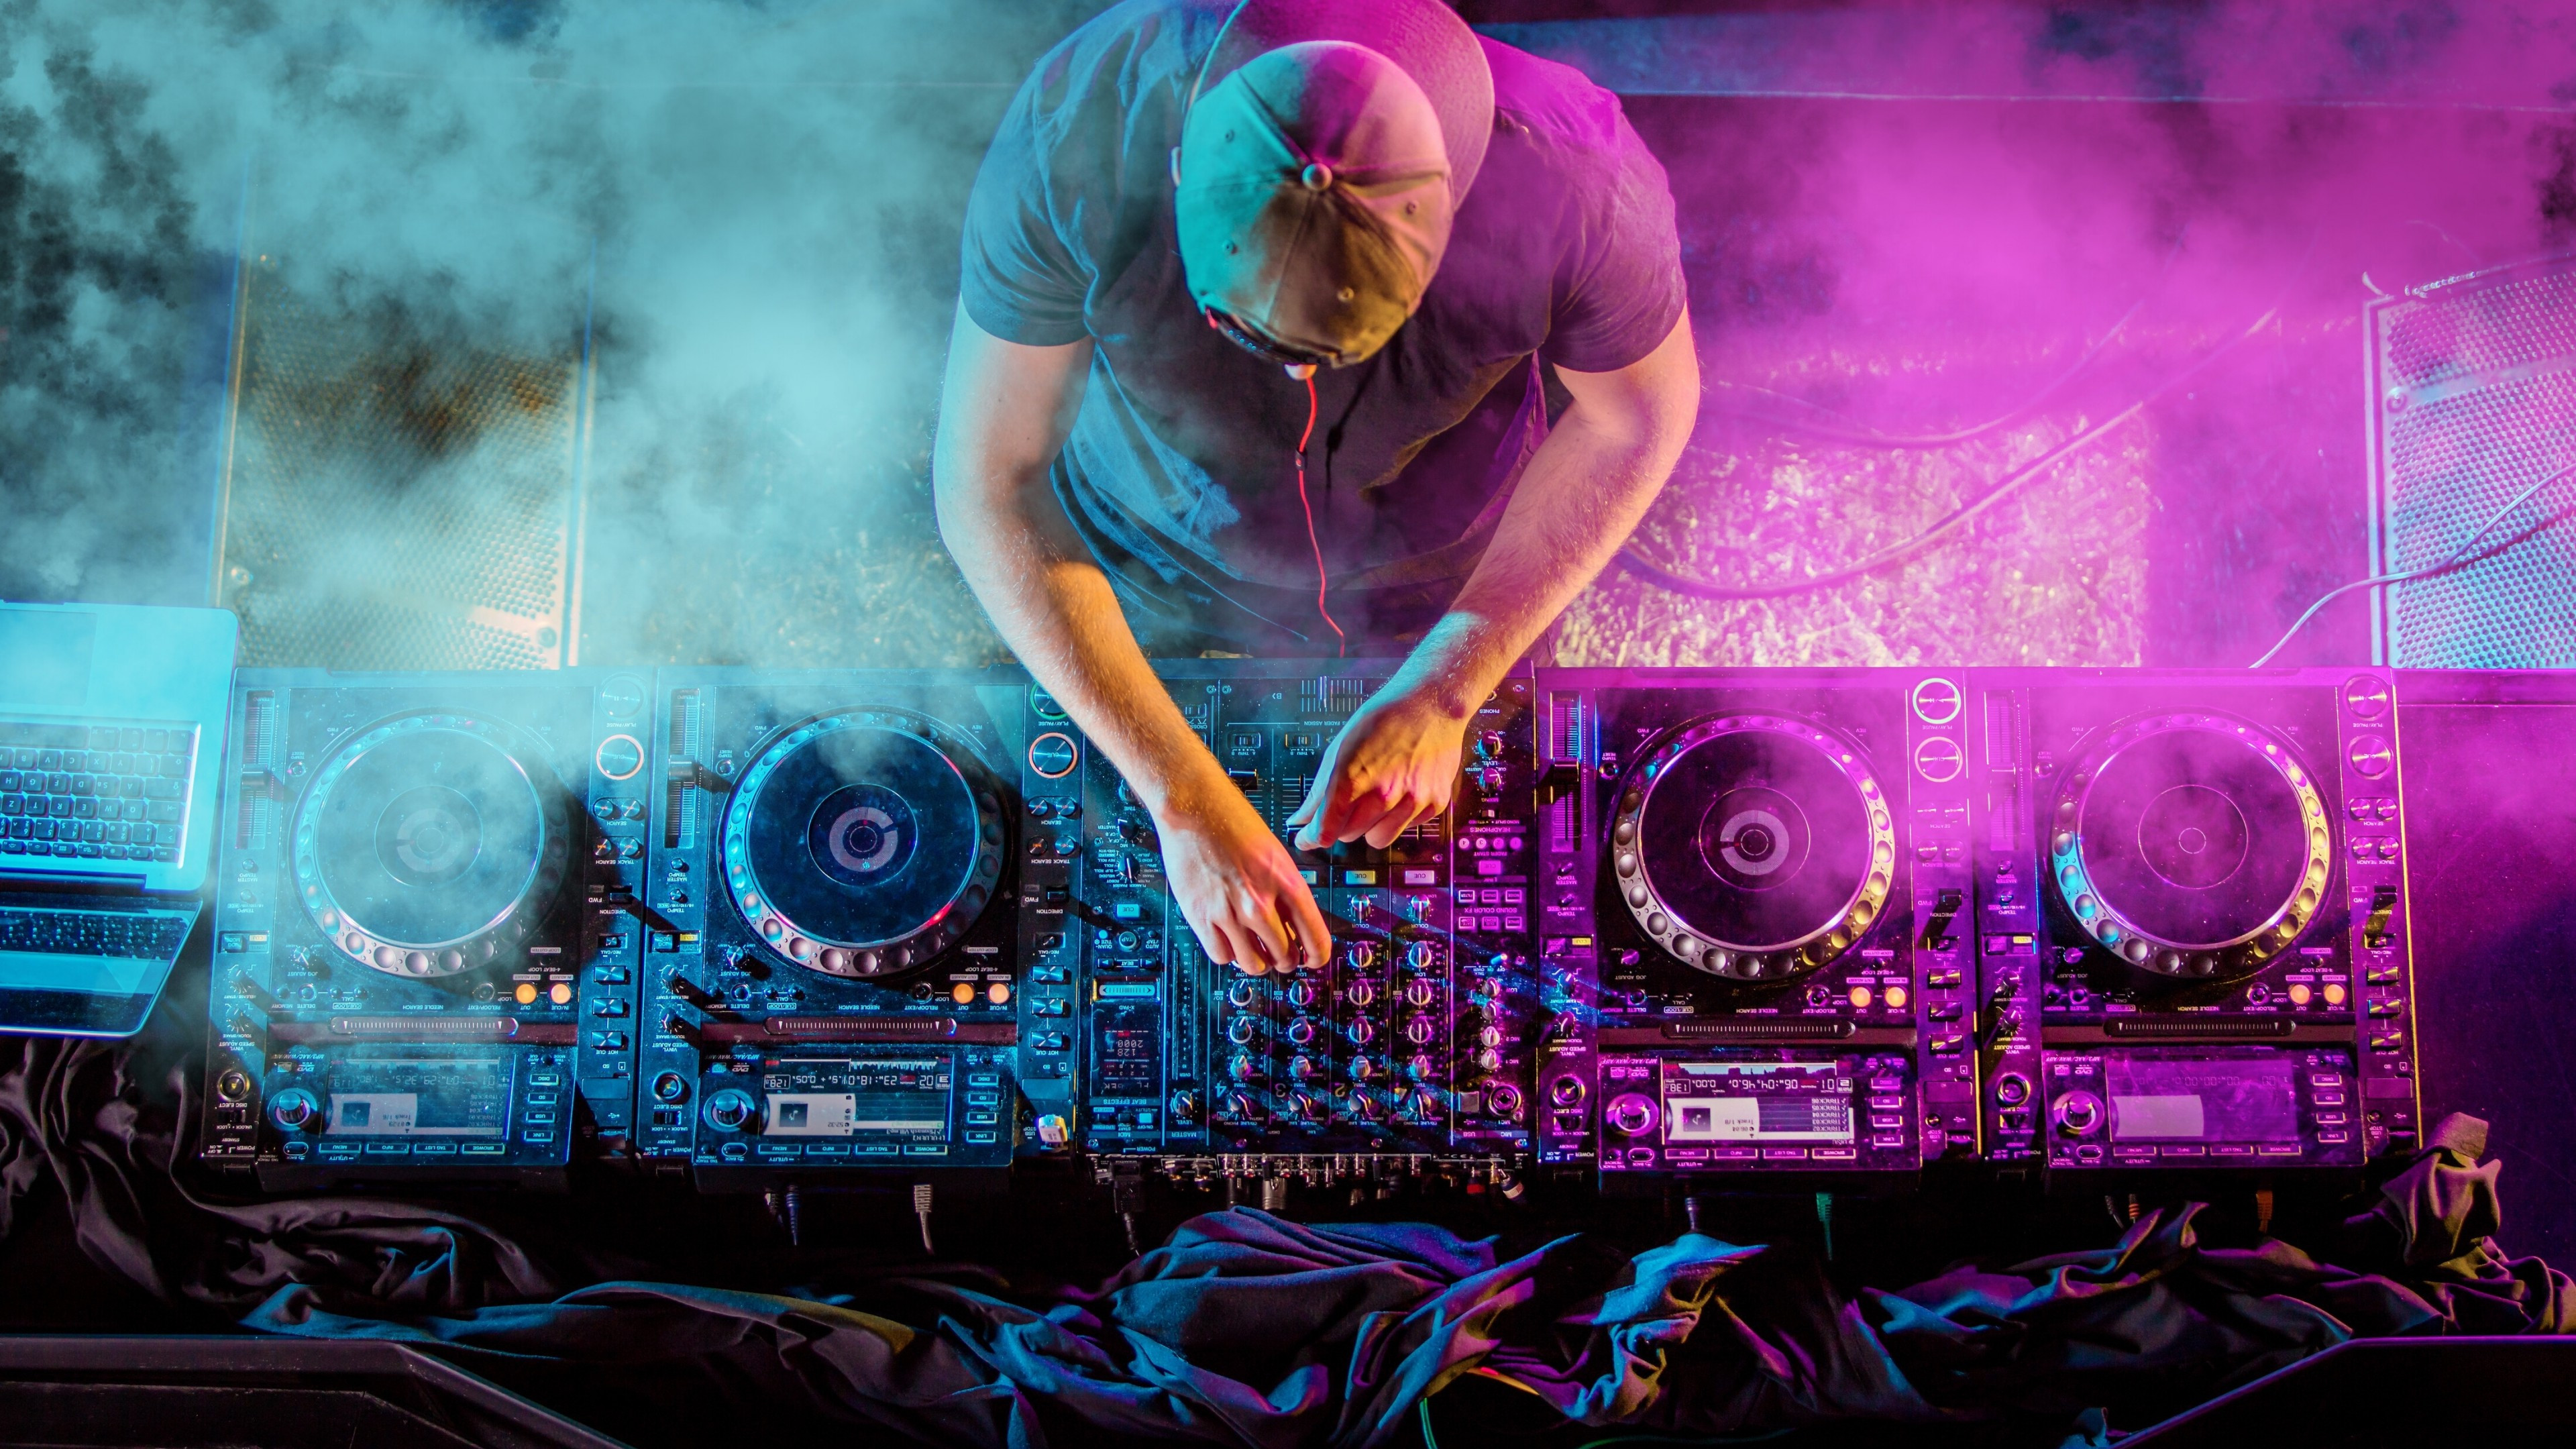 Download 3840x2160 Dj, Music Producer, Stage, Dj Controller, Mixing Wallpaper for UHD TV